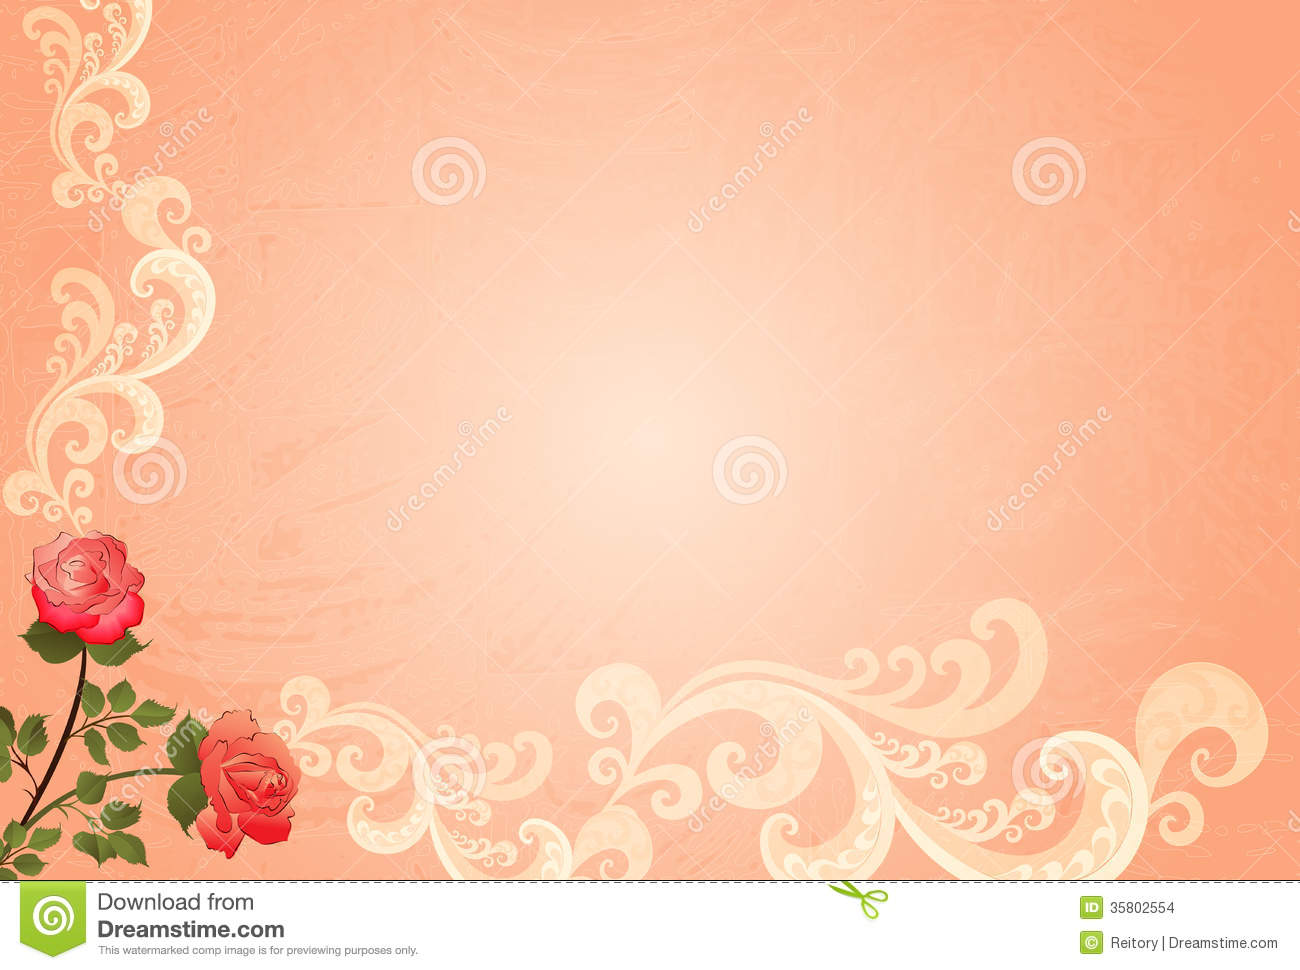 Grungy Background Peach Color With Roses Stock Images   Image